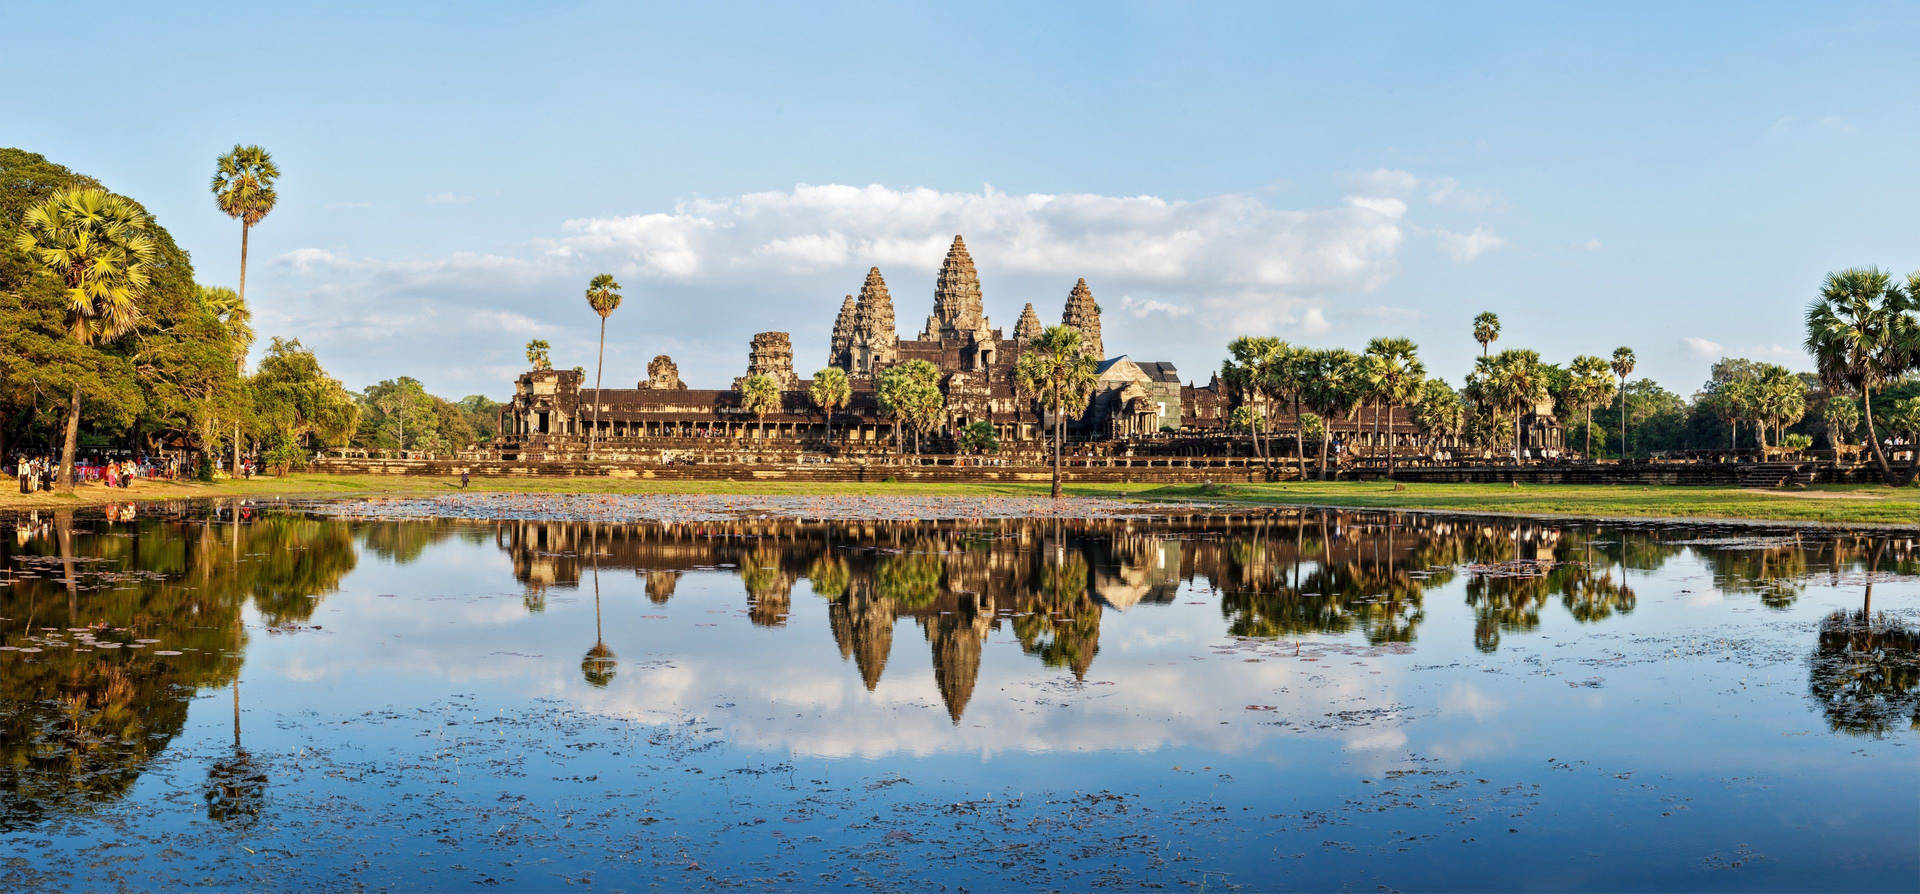 Caption: Majestic View Of Angkor Wat Reflecting Under The Azure Sky